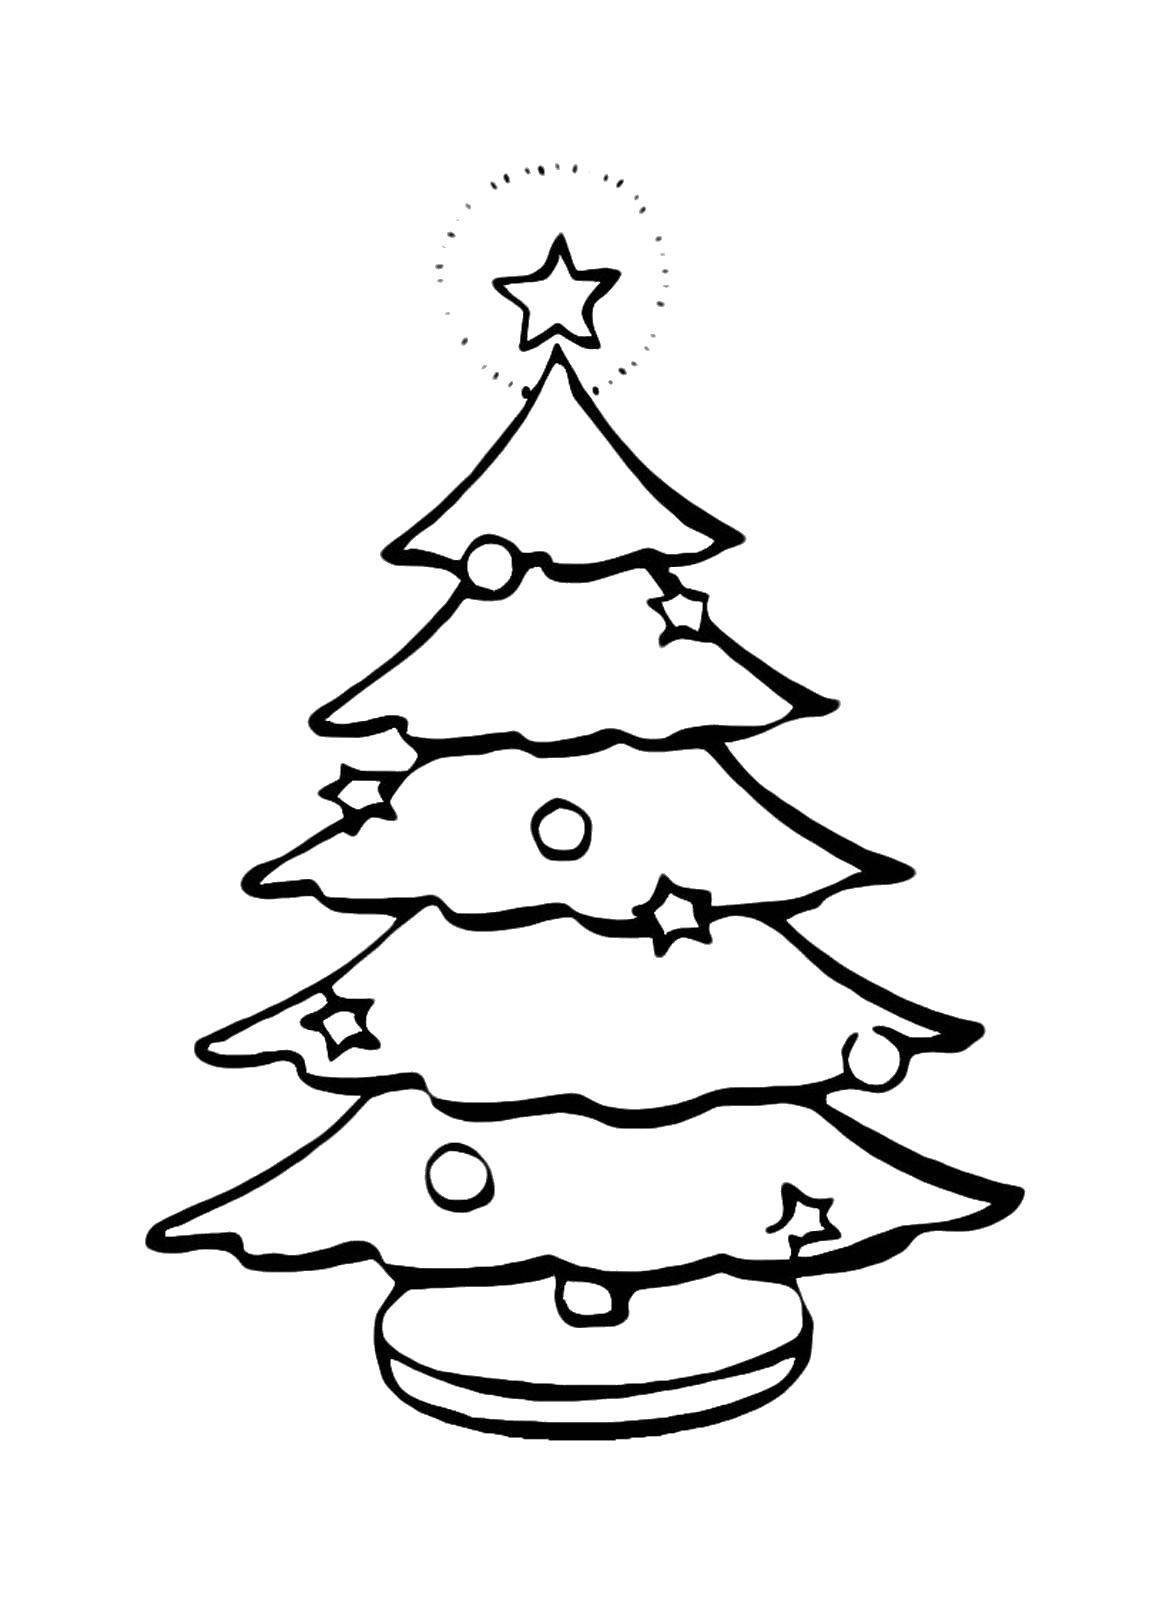 Coloring Asterisk glows. Category coloring Christmas tree. Tags:  New Year, tree, gifts, toys.